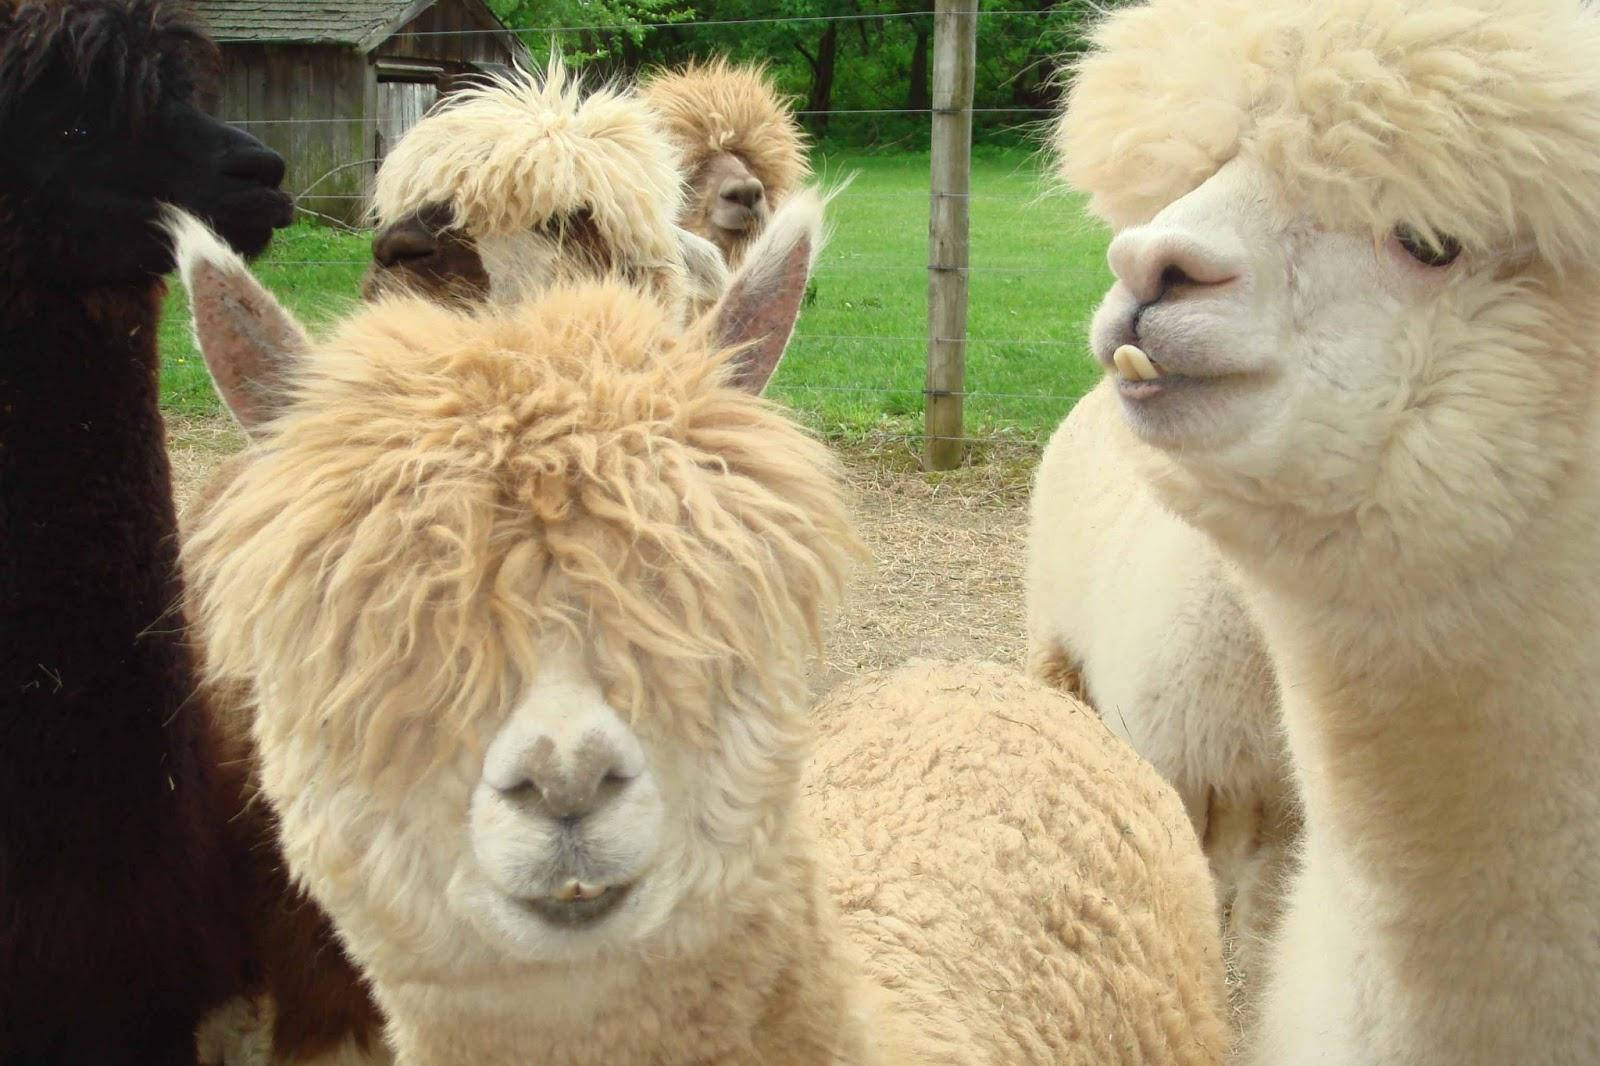 Thick-haired Alpacas